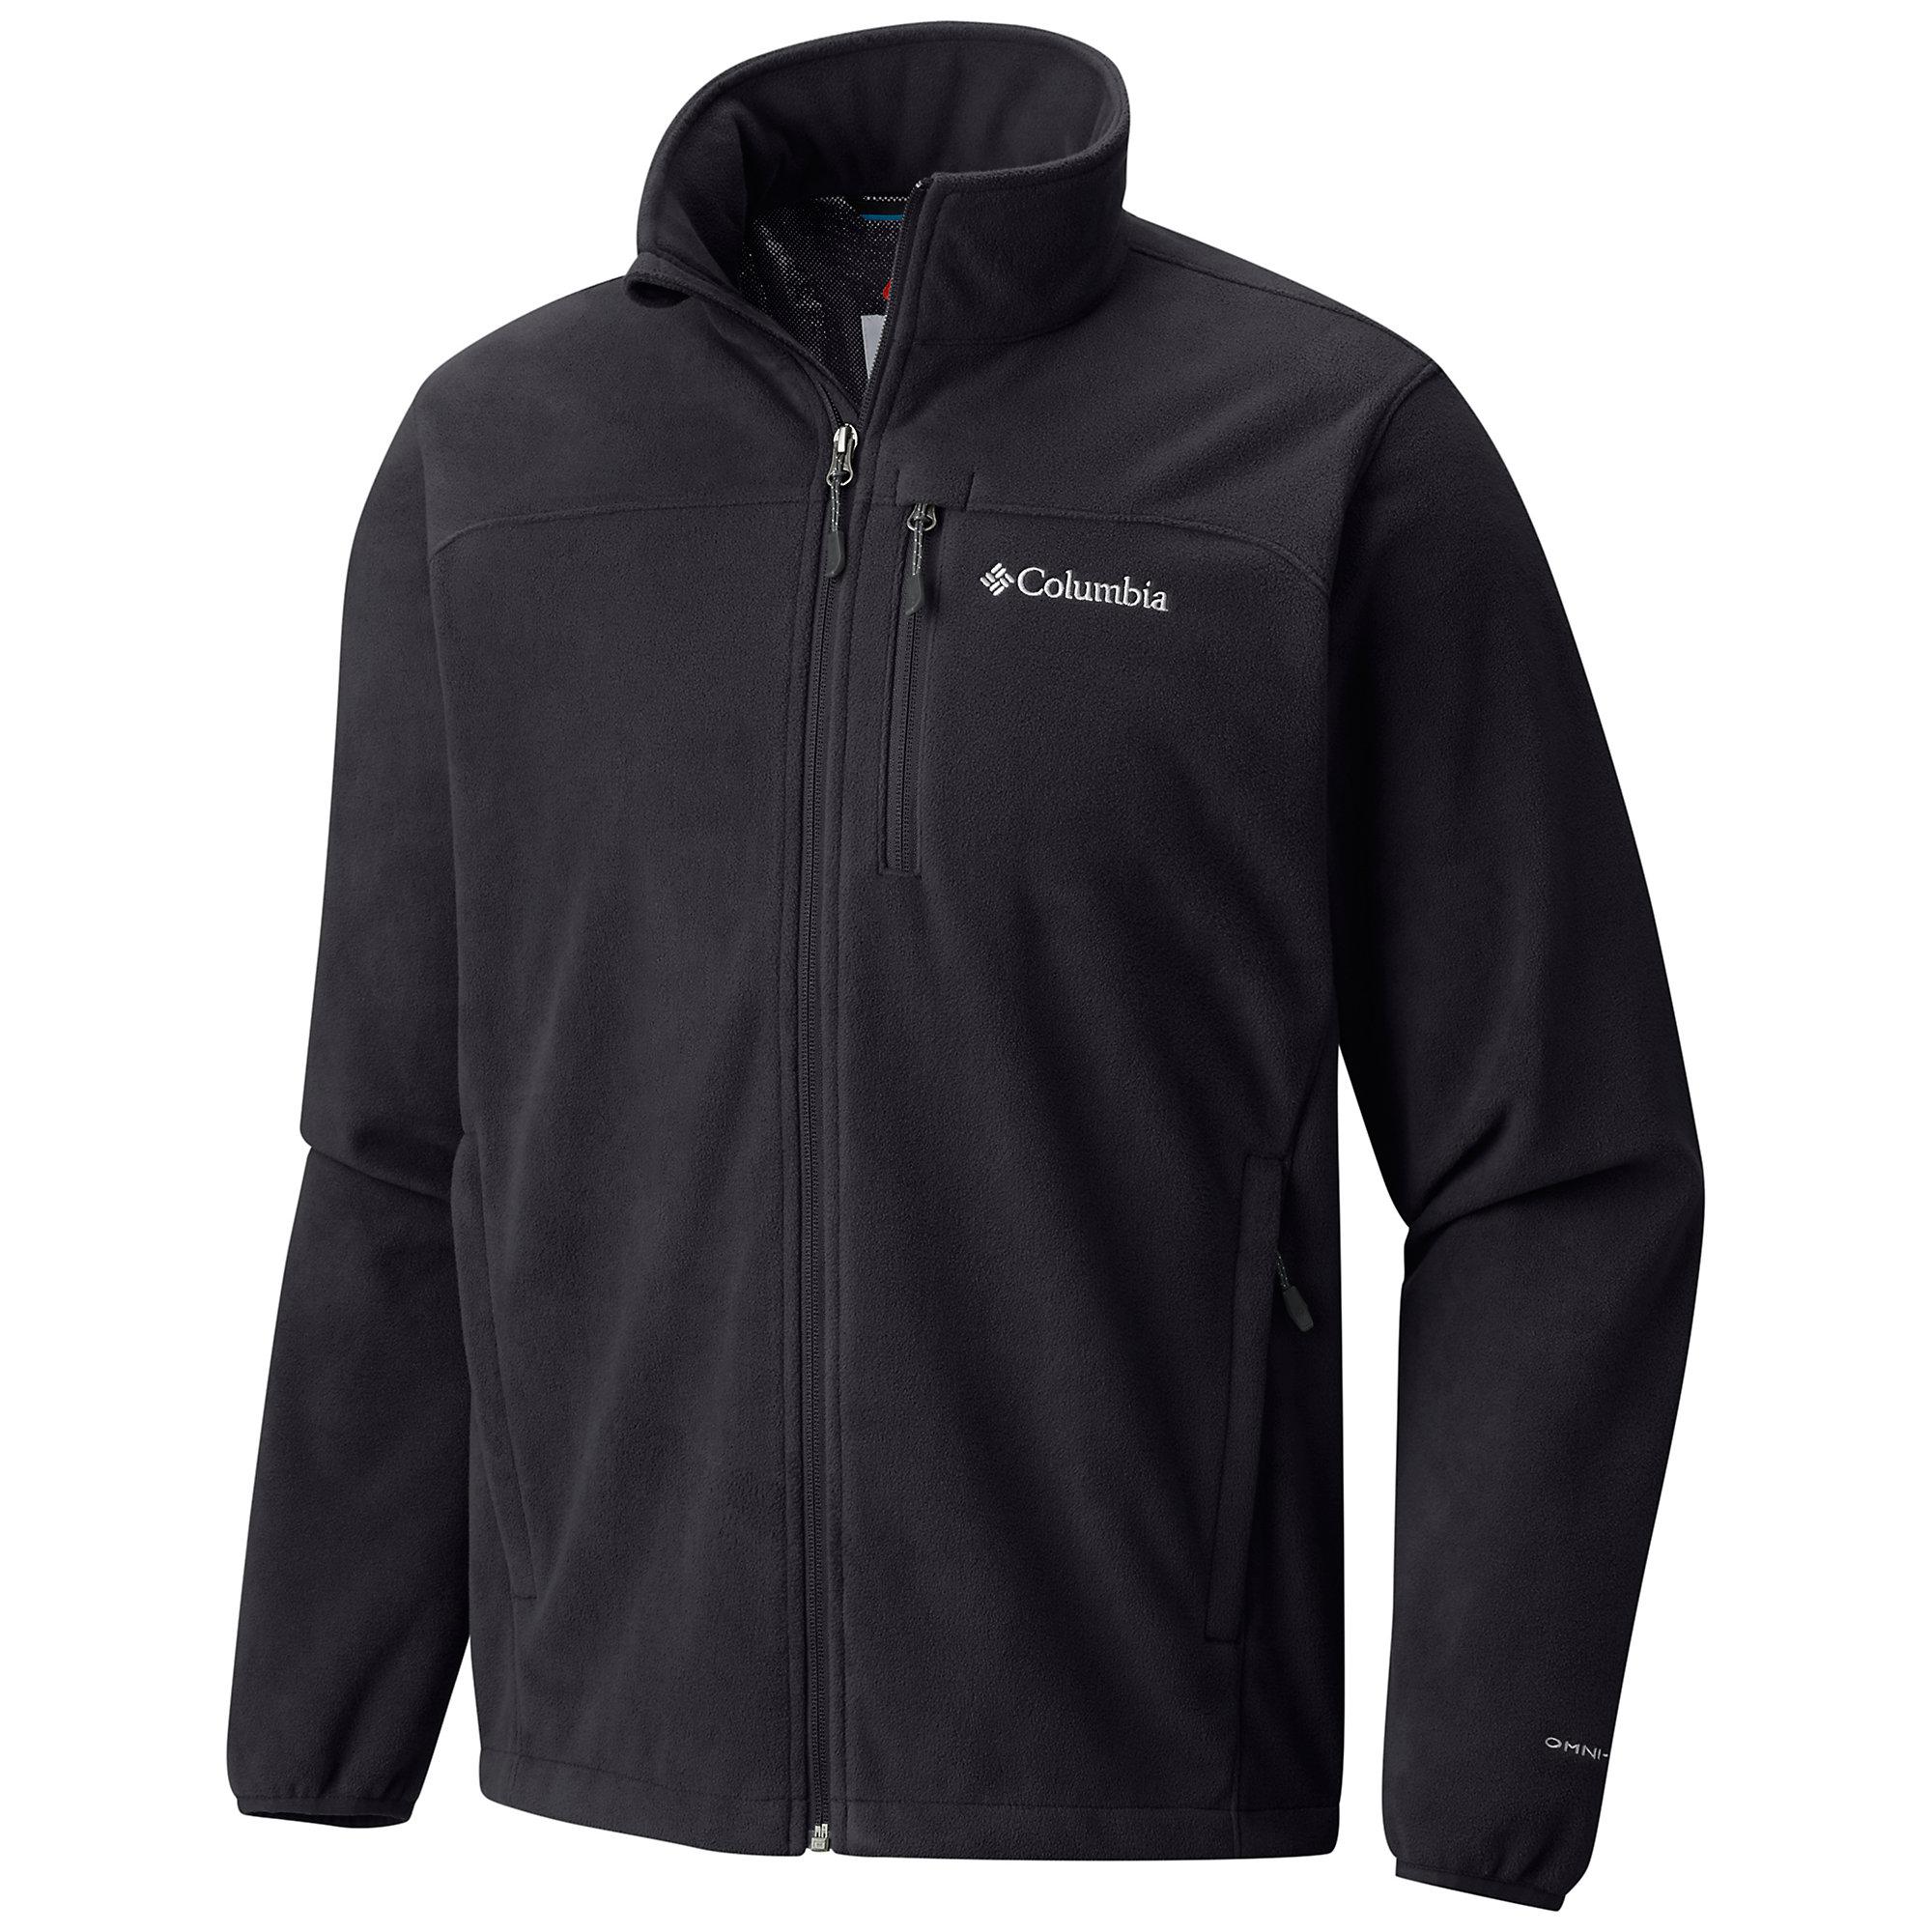 Columbia Synthetic Wind Protector in Black for Men - Lyst